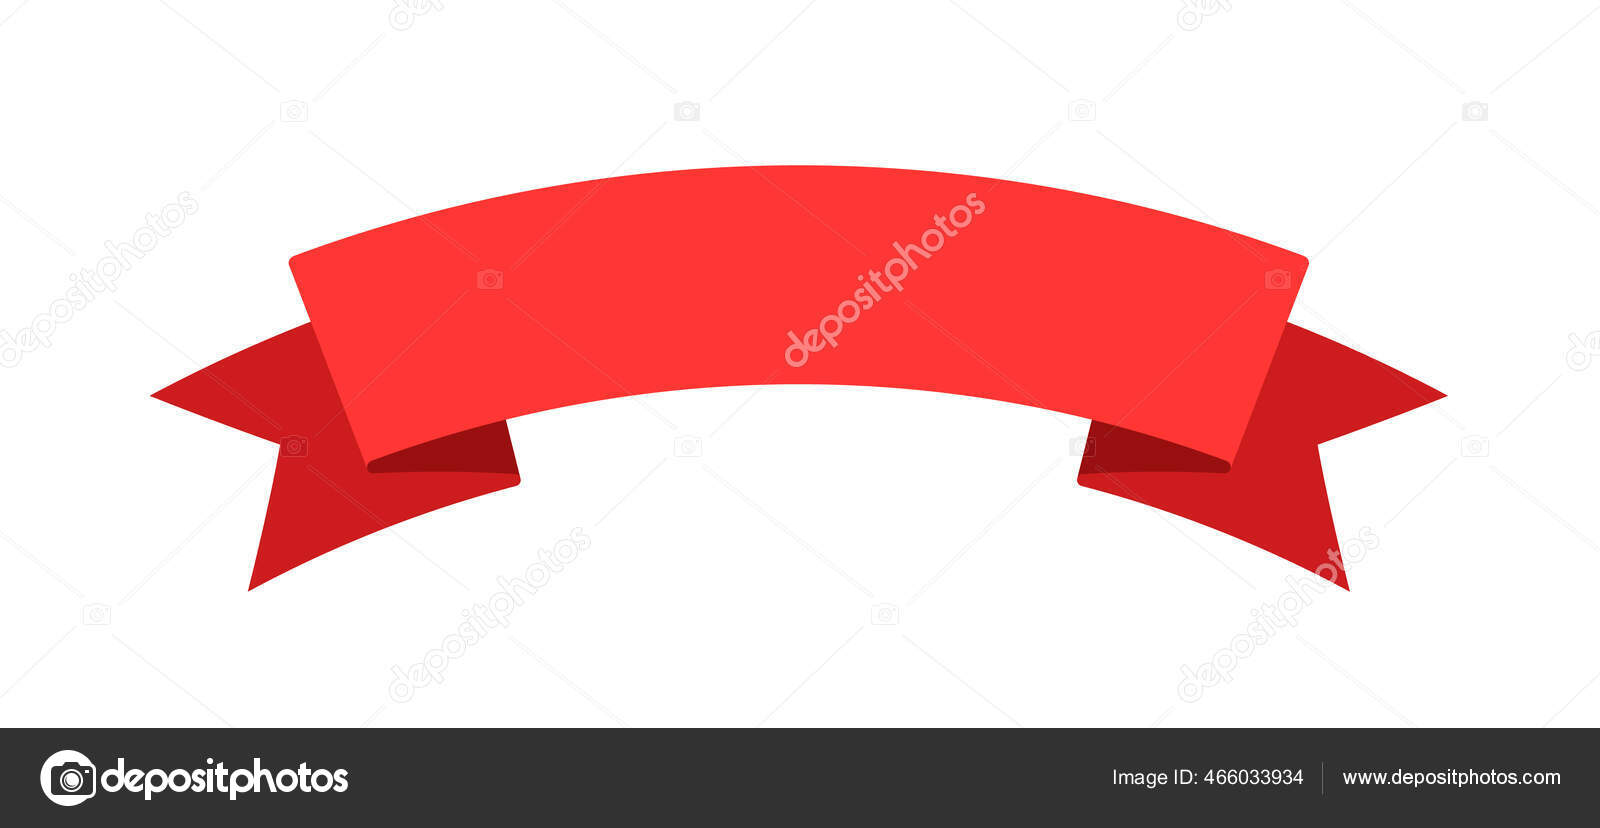 Bookmark Ribbon Sign Isolated on White Background Stock Vector